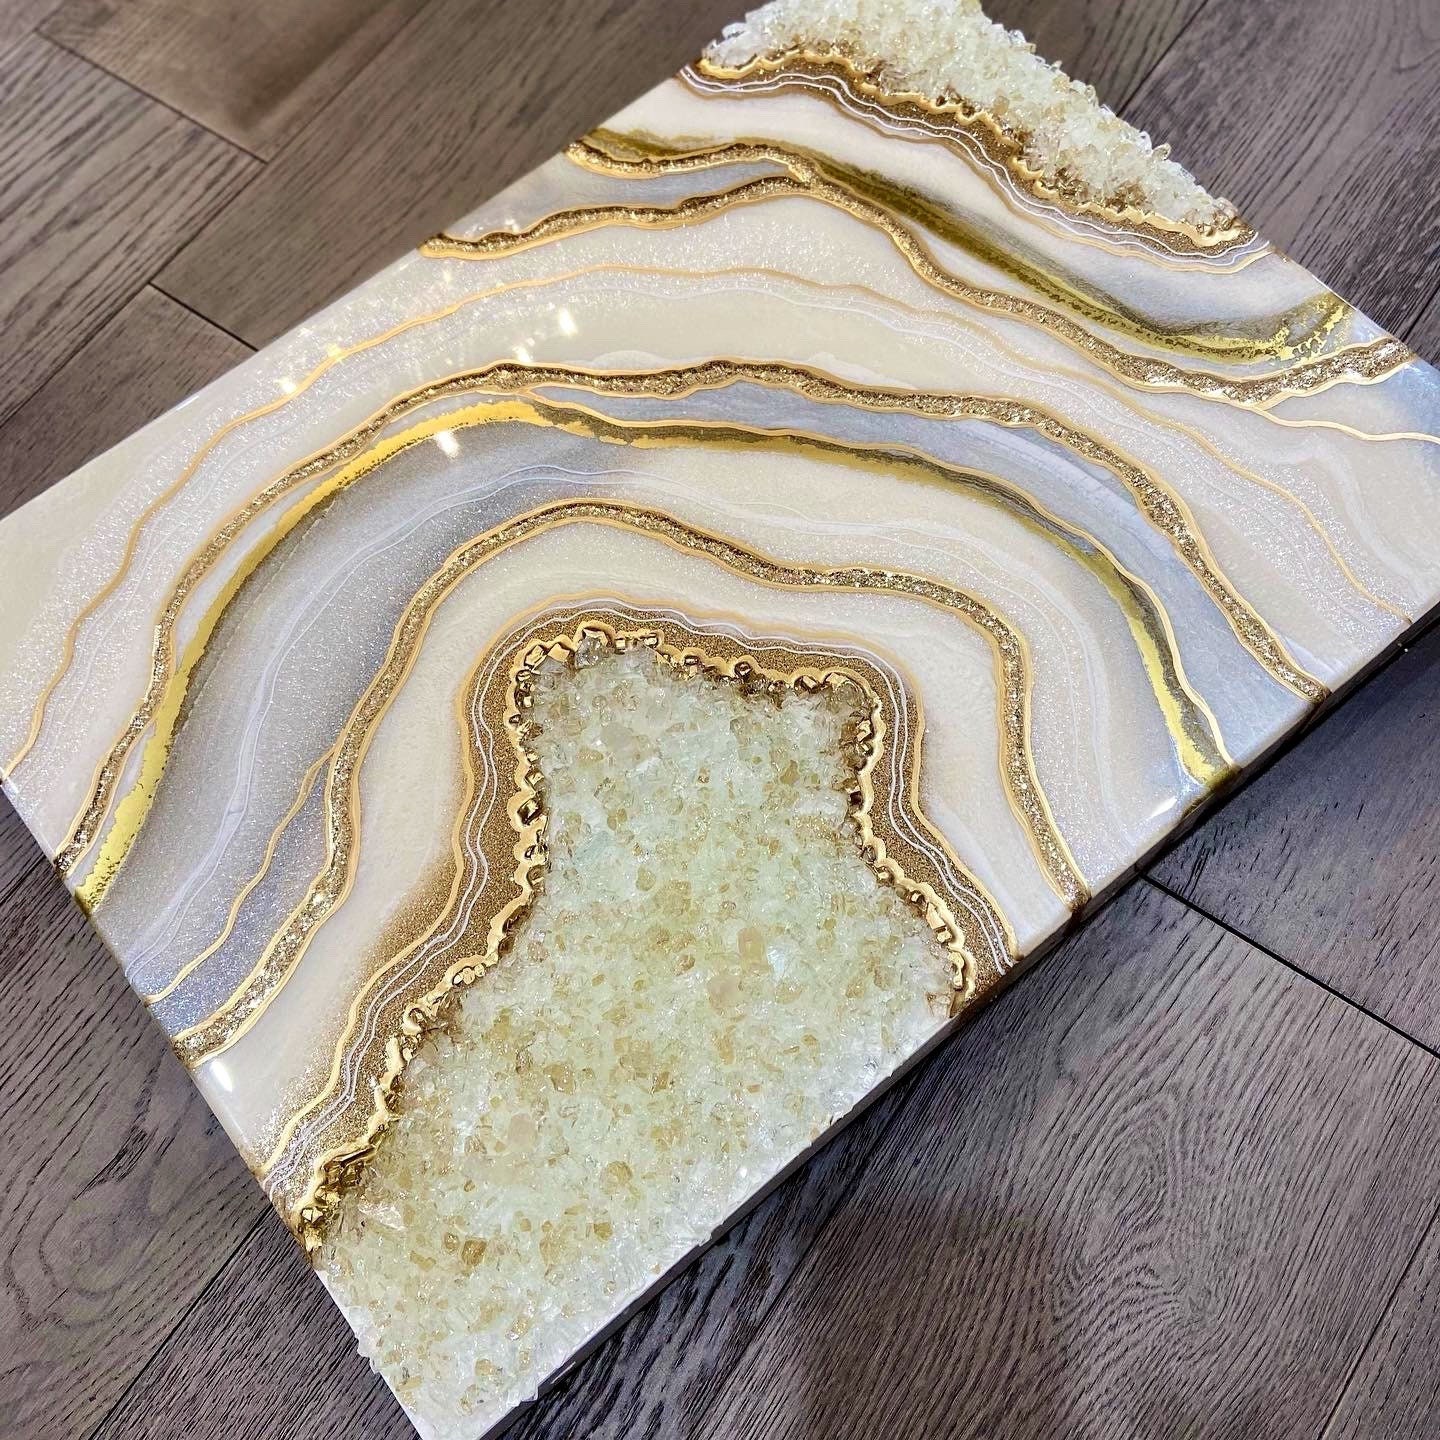 Artistic Decoration Made of Golden Resin. Epoxy Resin Paint